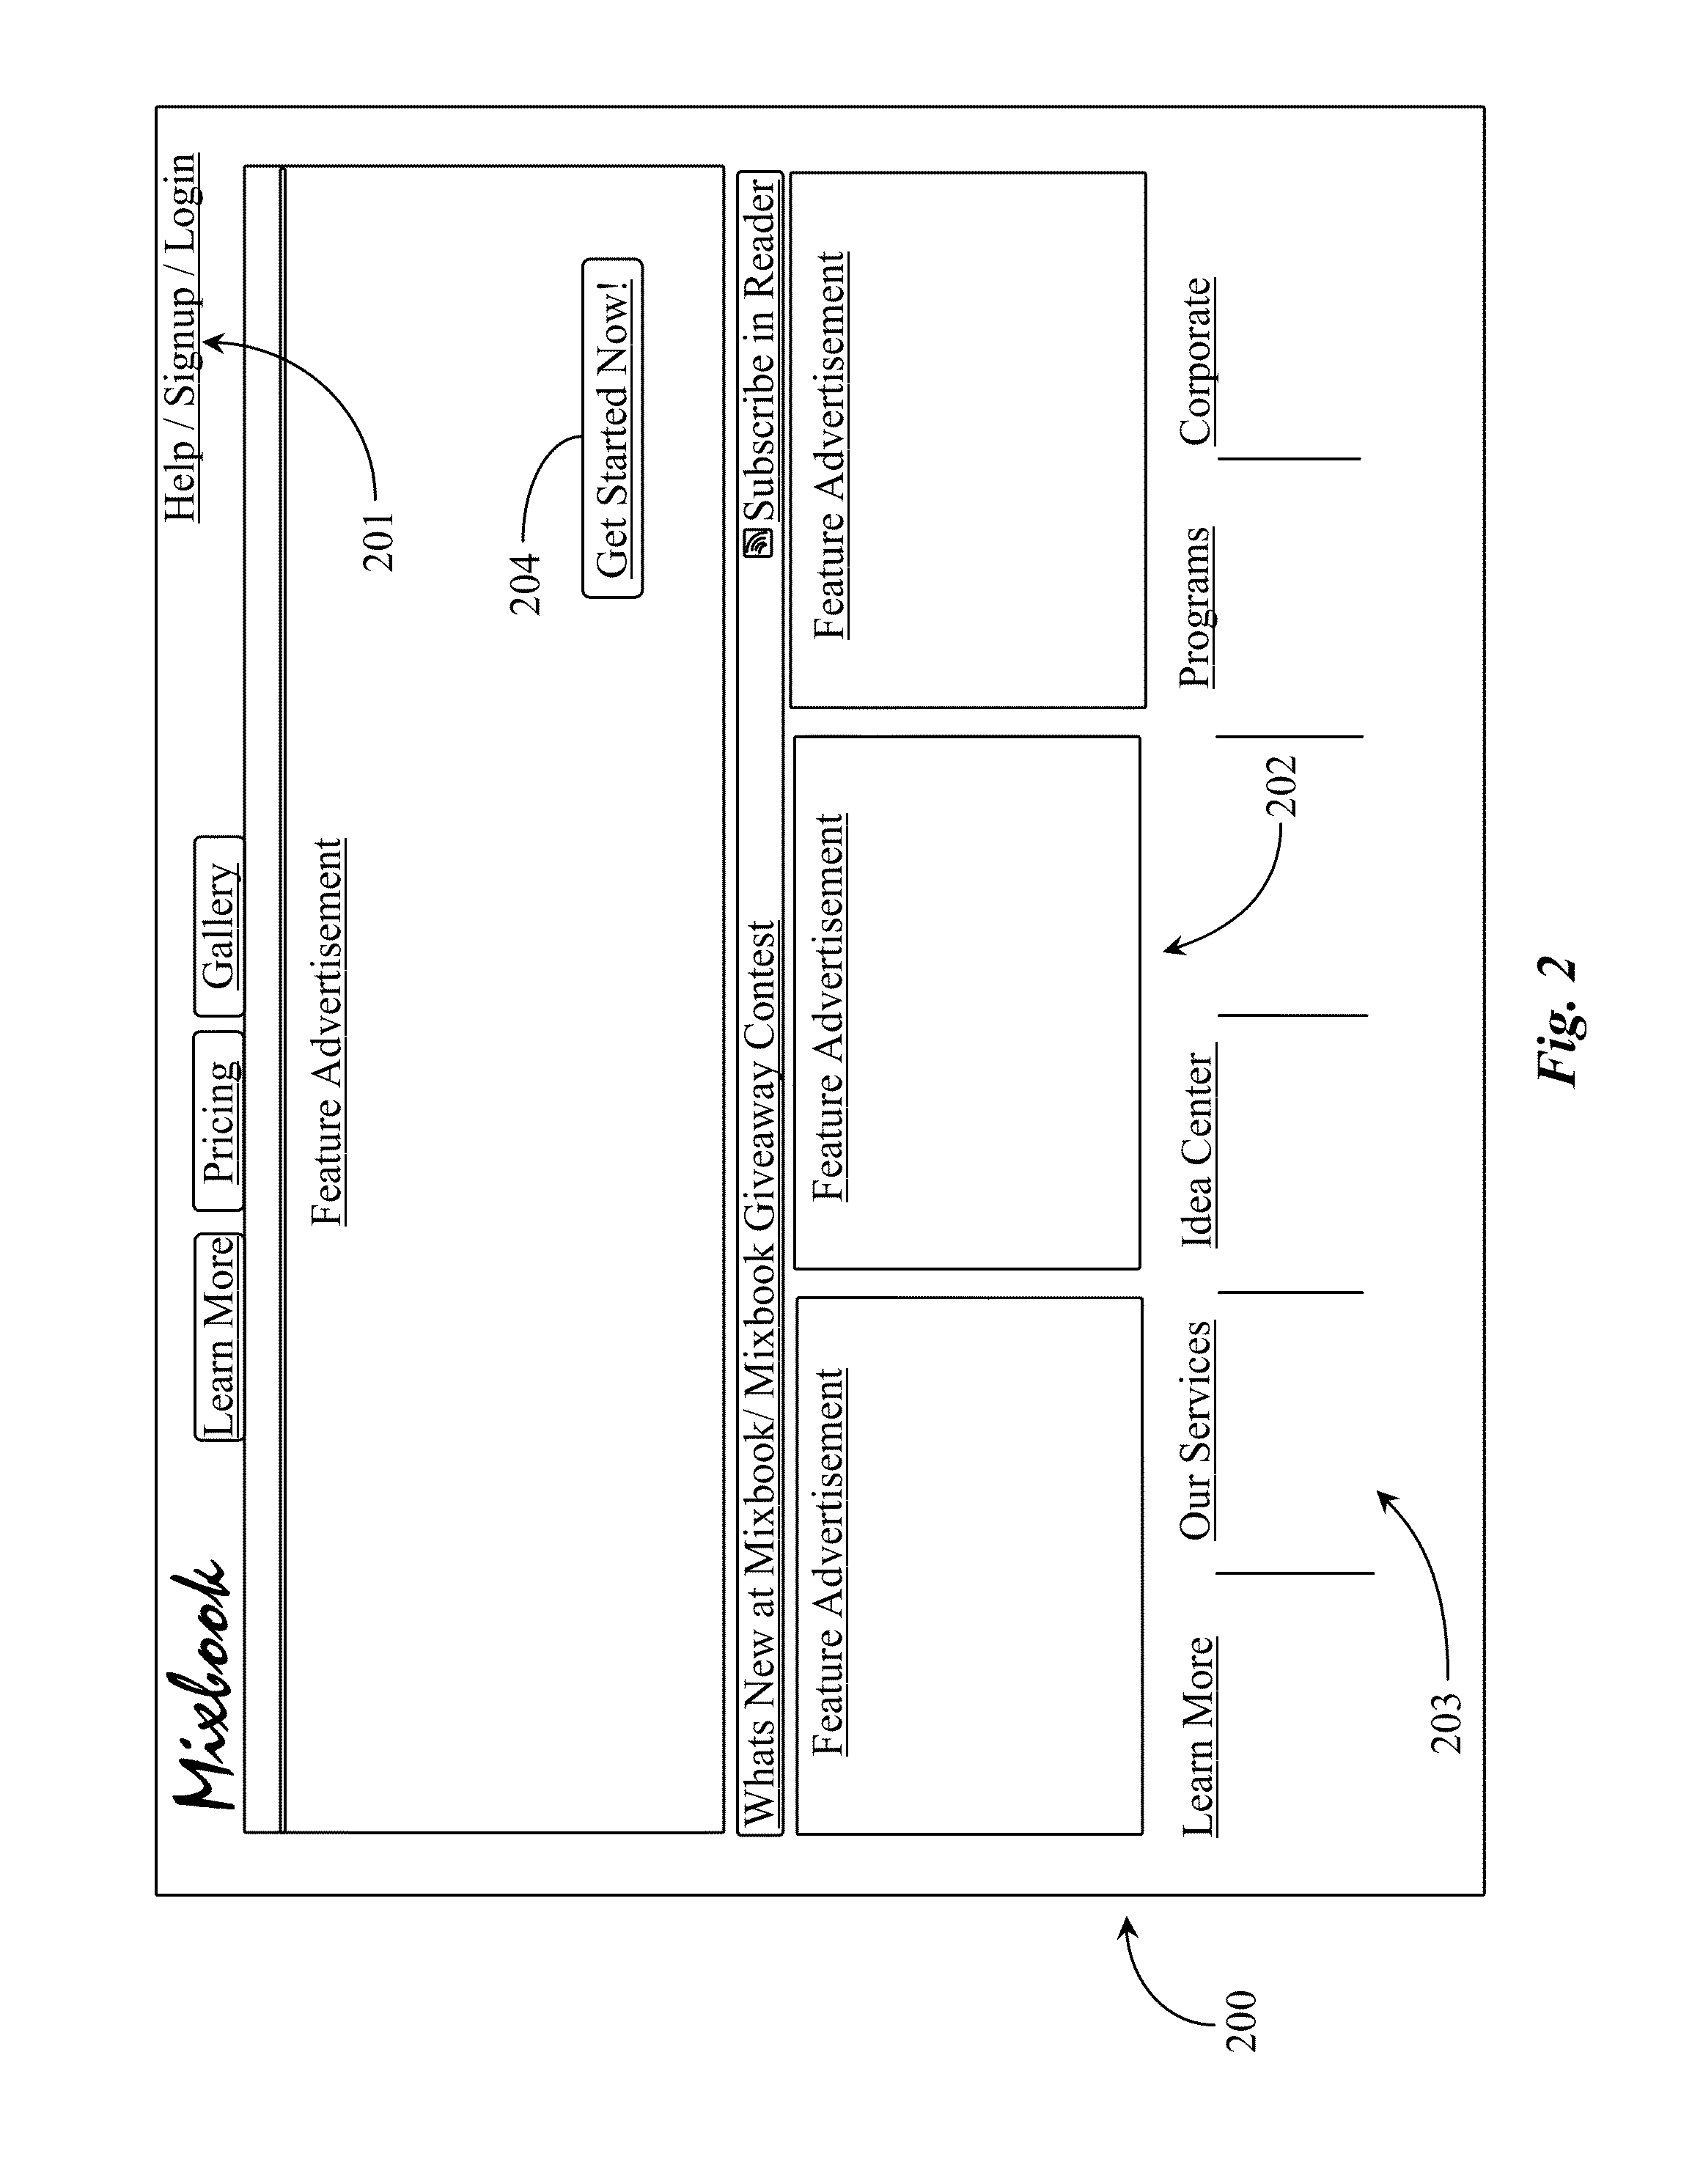 Method for Previewing Orders Placed for Image-Based Projects created through an Electronic Interface from a Mobile Application